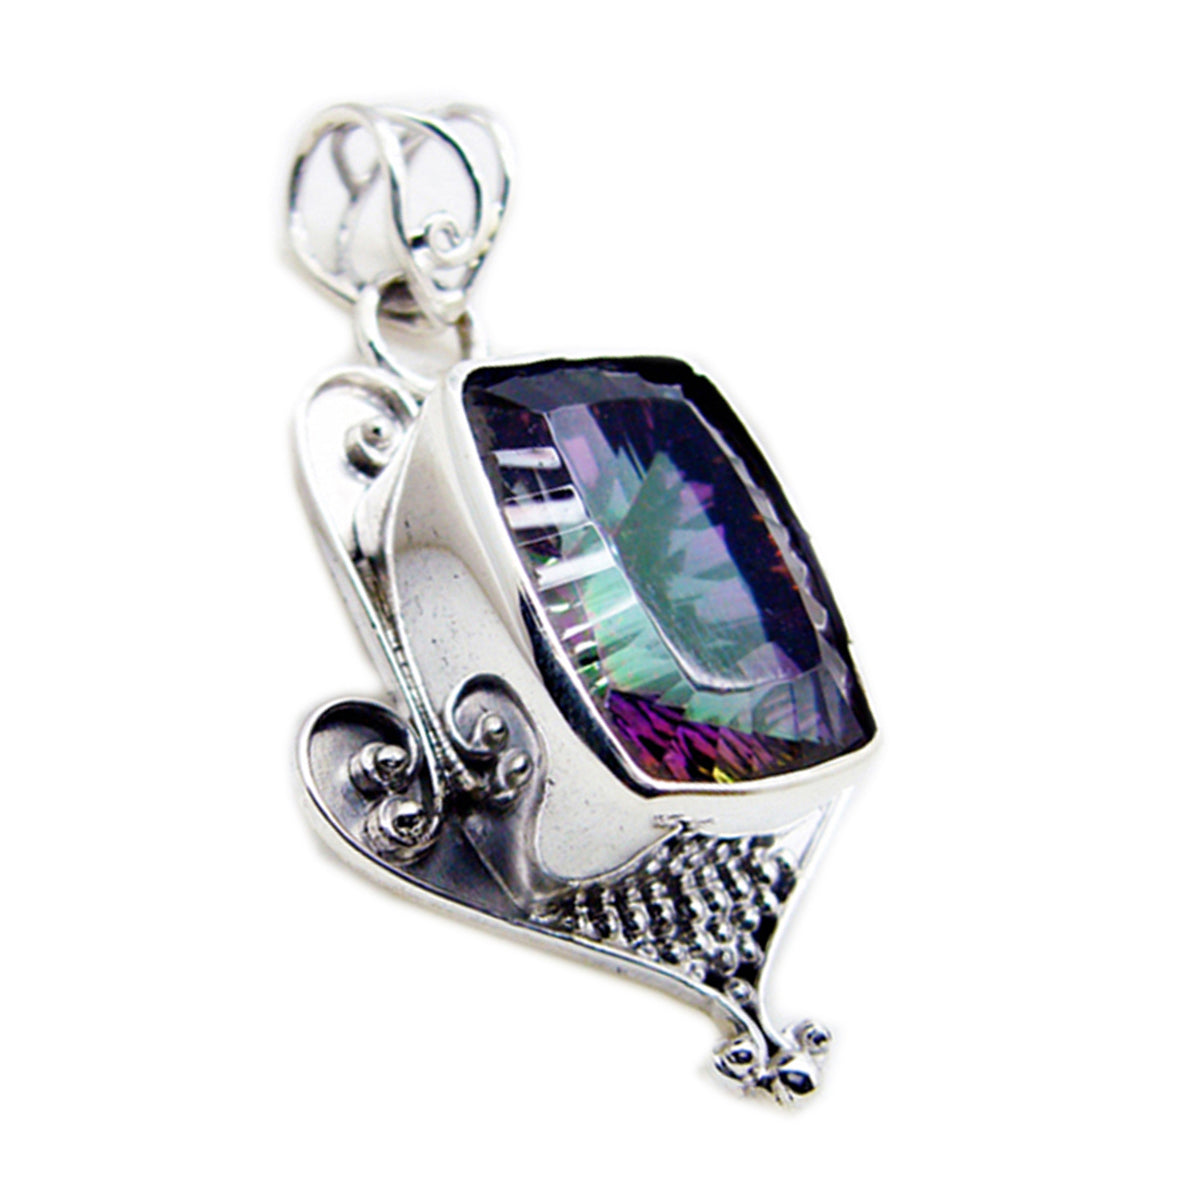 Riyo Nice Gems Octagon Faceted Multi Color Mystic Quartz Solid Silver Pendant Gift For Good Friday